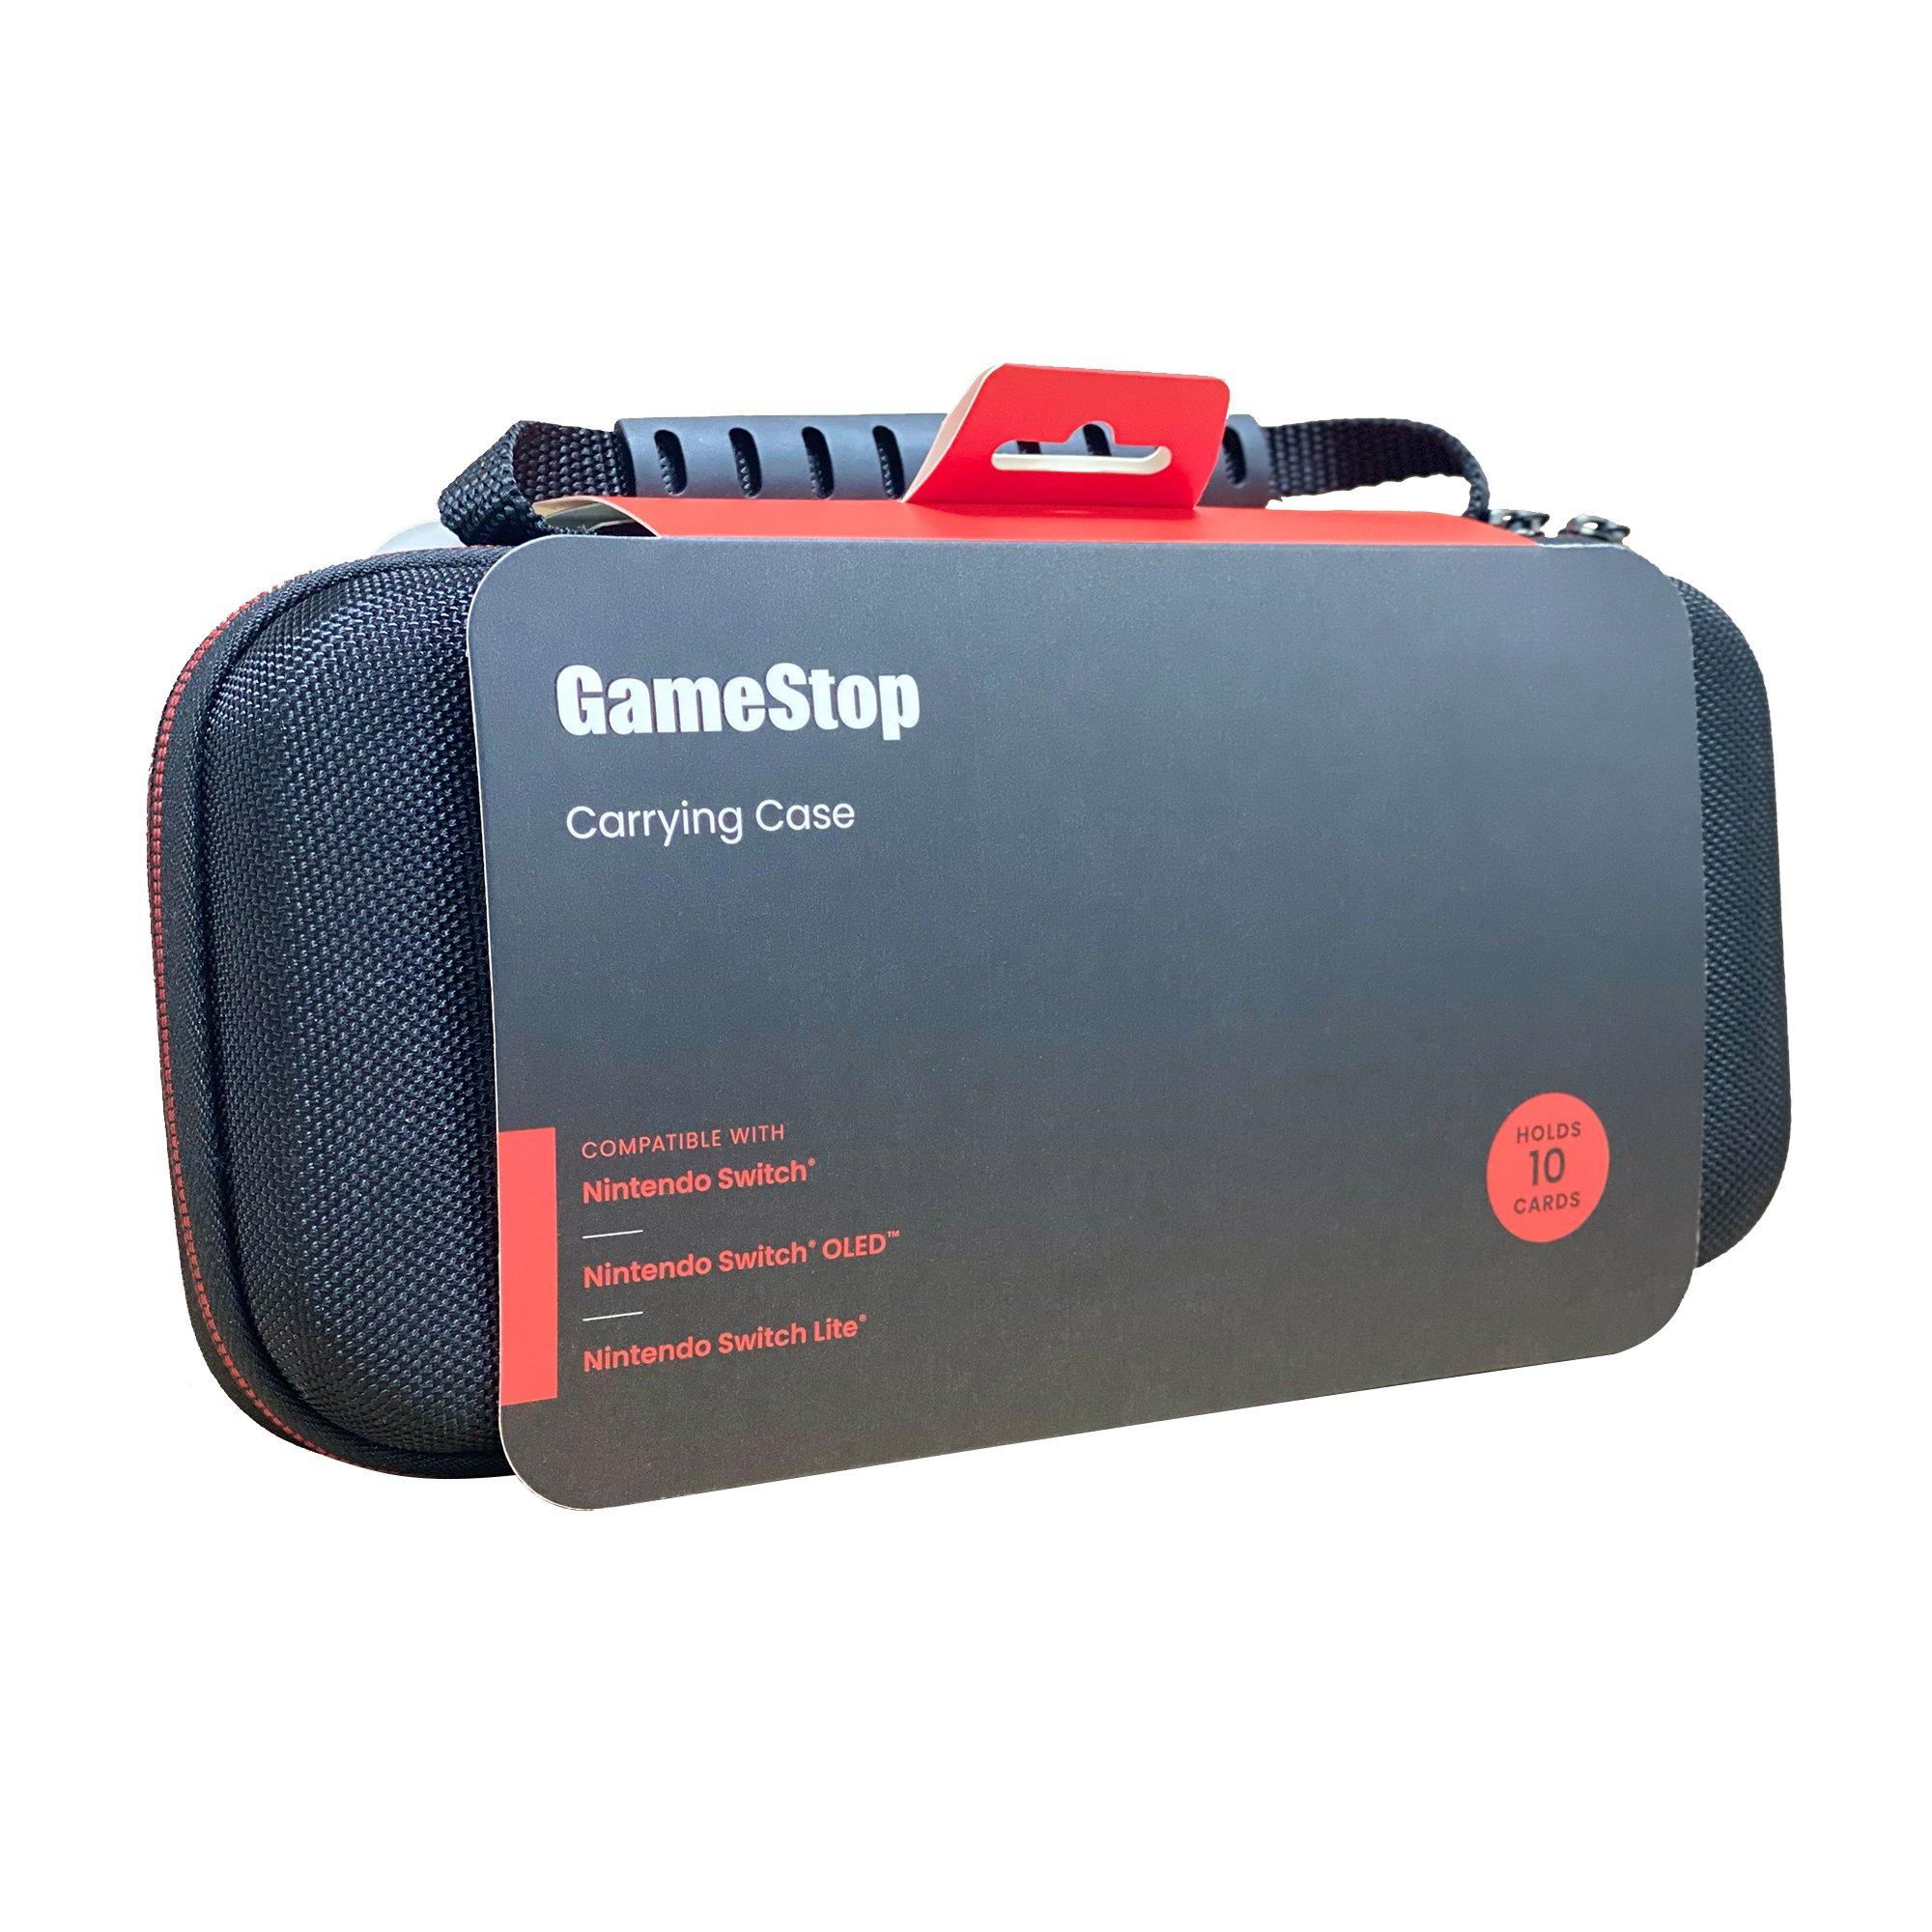 GameStop Hard Shell Carry Case with 10 Cards Storage Compatible for Nintendo Switch, Switch Lite and Switch OLED